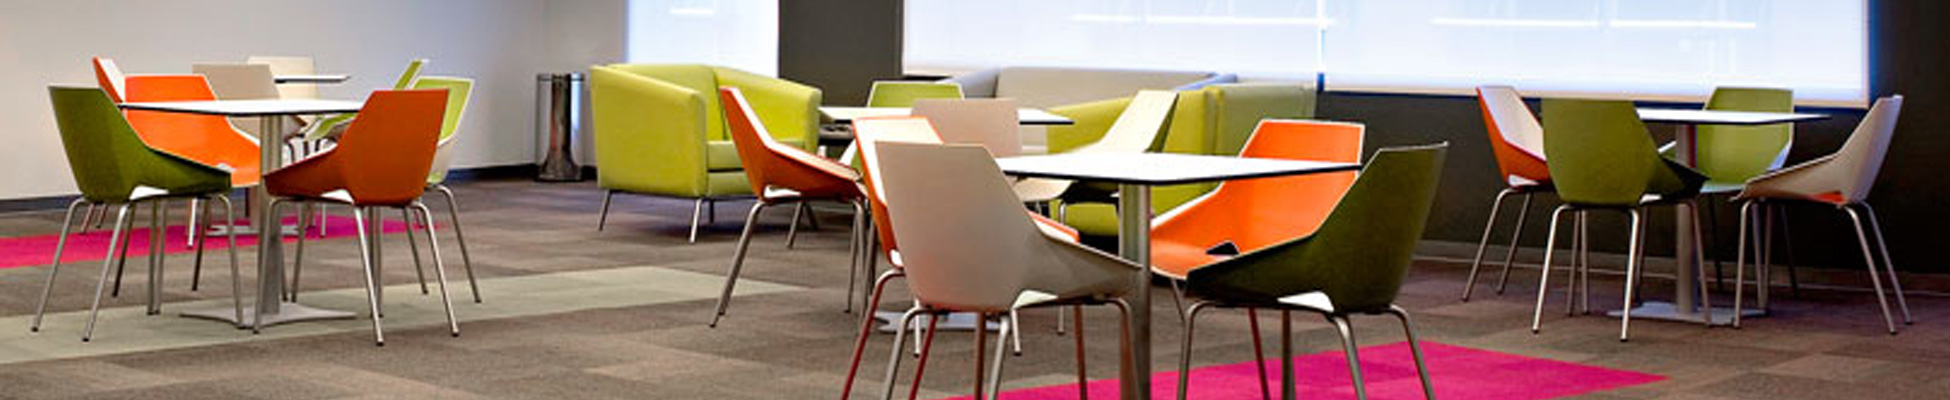 modern office tables chairs, Auditorium Chairs, Bar stools, Cafeteria Chairs, furnitures